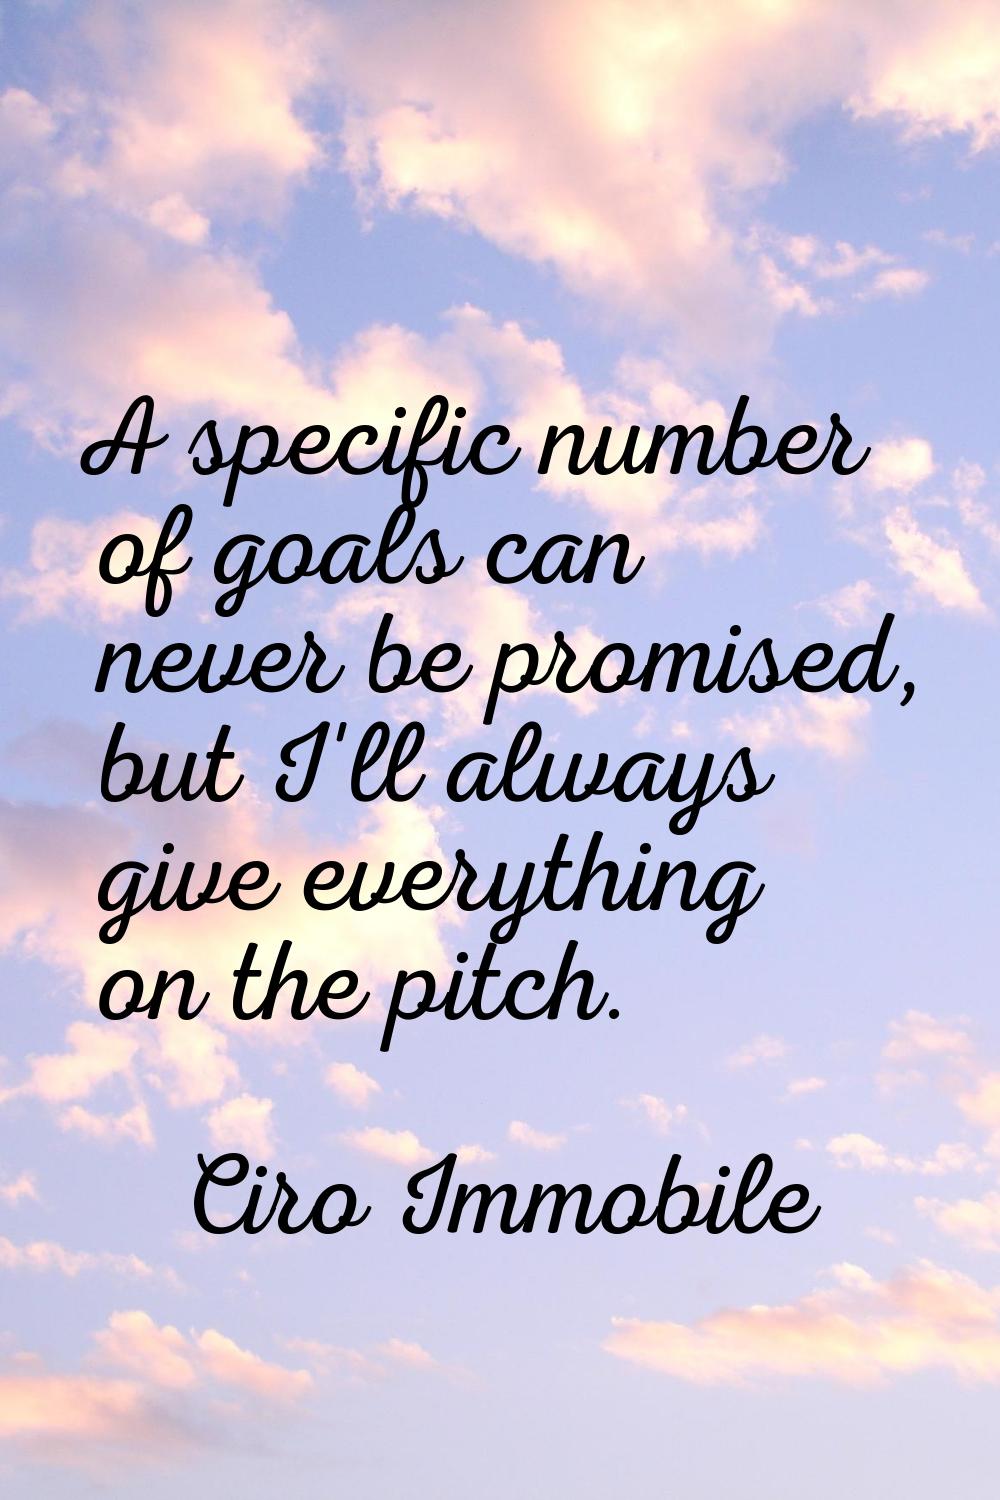 A specific number of goals can never be promised, but I'll always give everything on the pitch.